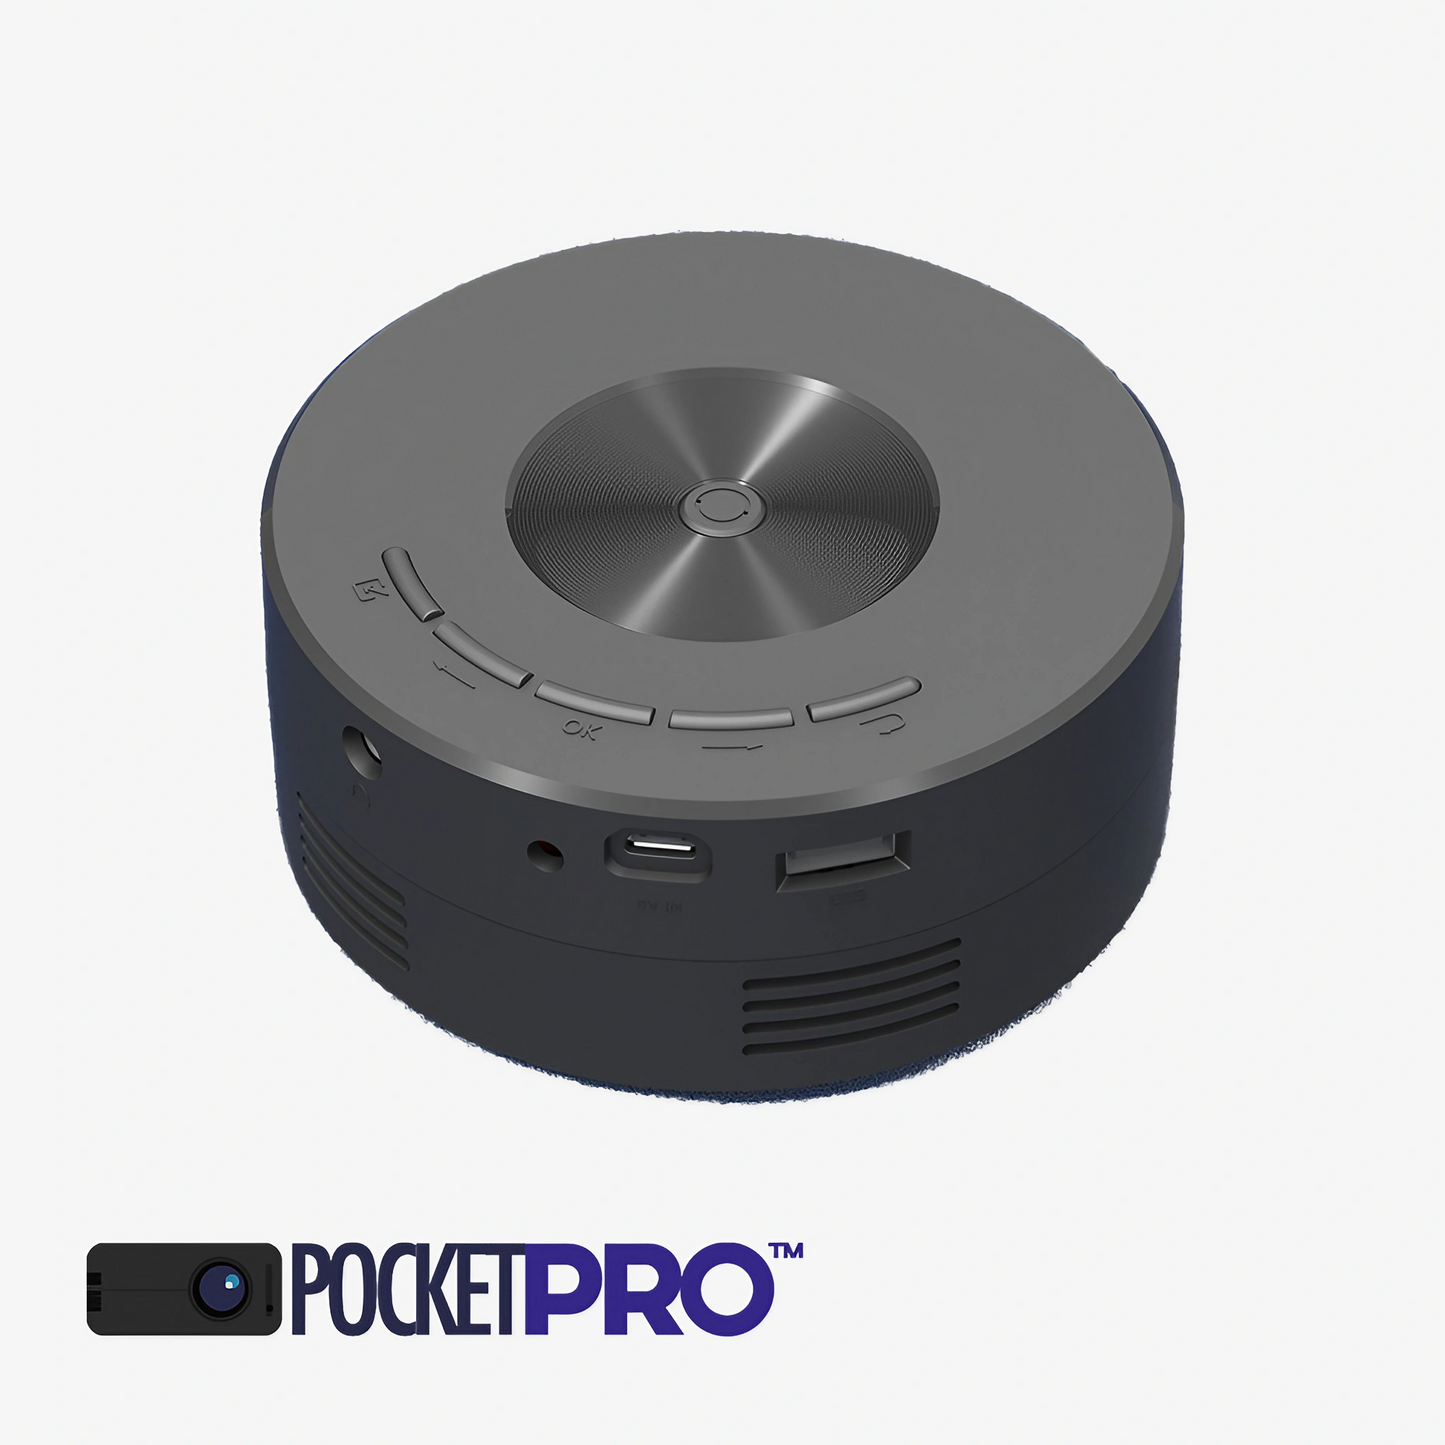 Discover The PocketPro's™ compatibility with various devices, including iOS, Android, and USB drives.